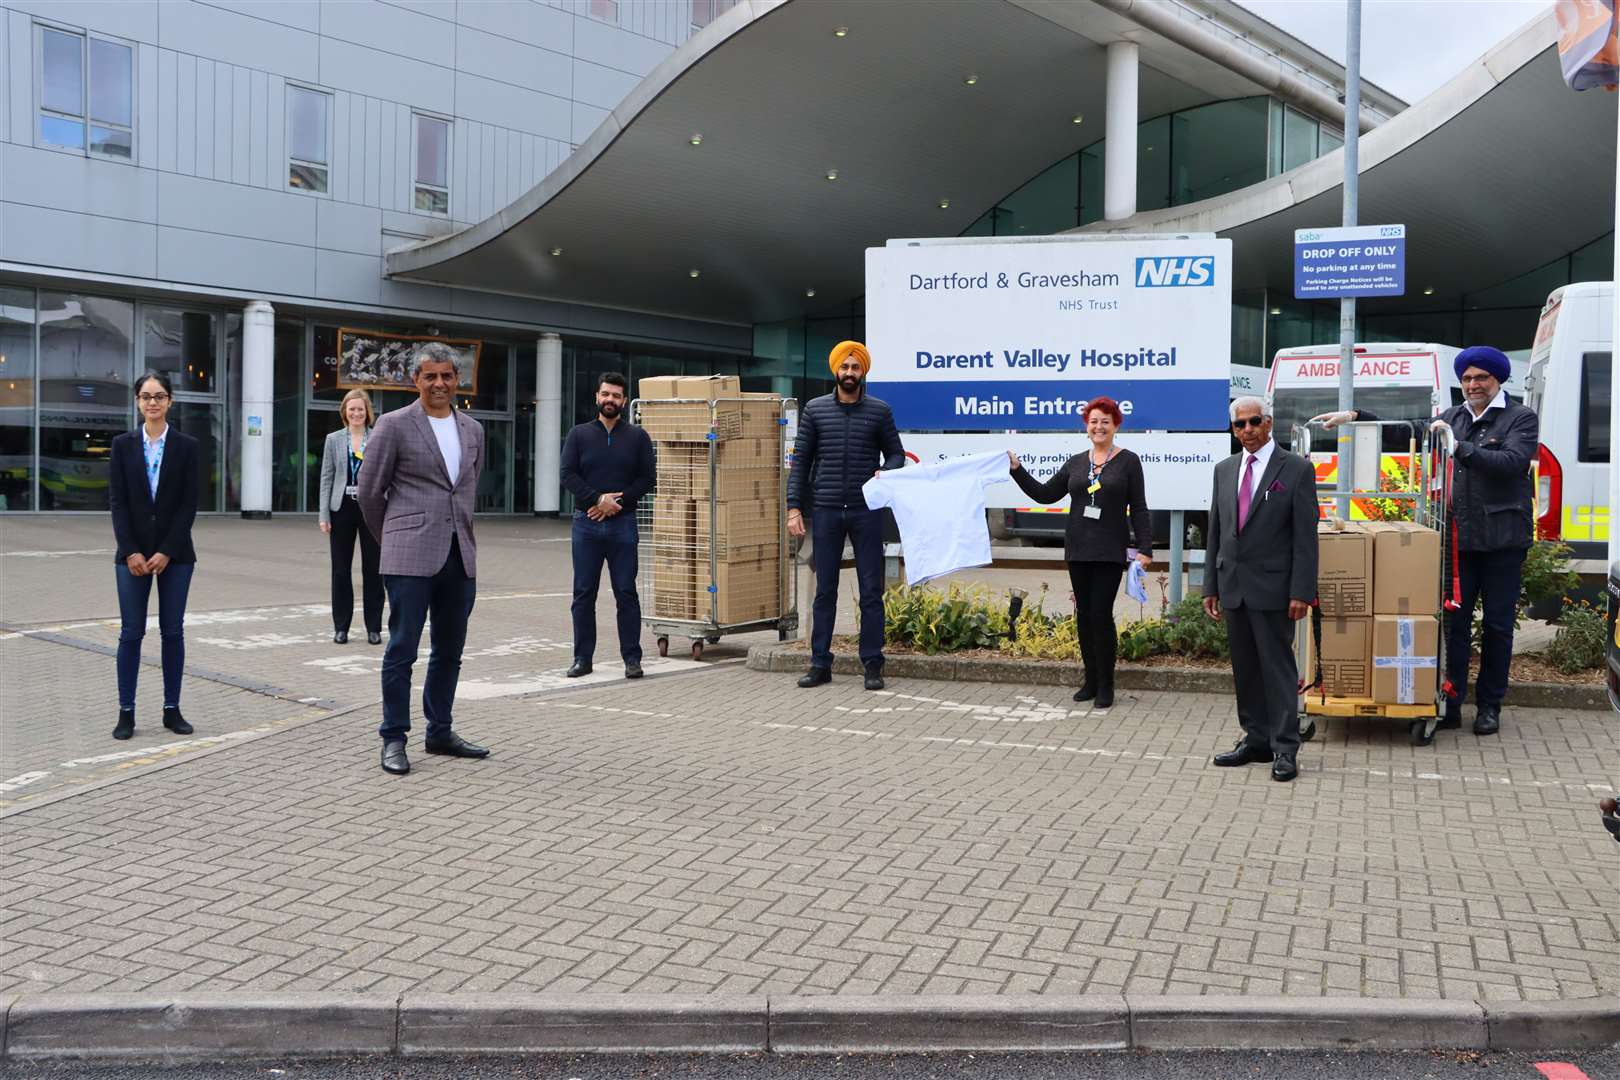 The Guru Nanak Darbar Gurdwara in Gravesend donated 350 pairs of scrubs to Darent Valley Hospital and have prepared hundreds of meals for hospital teams